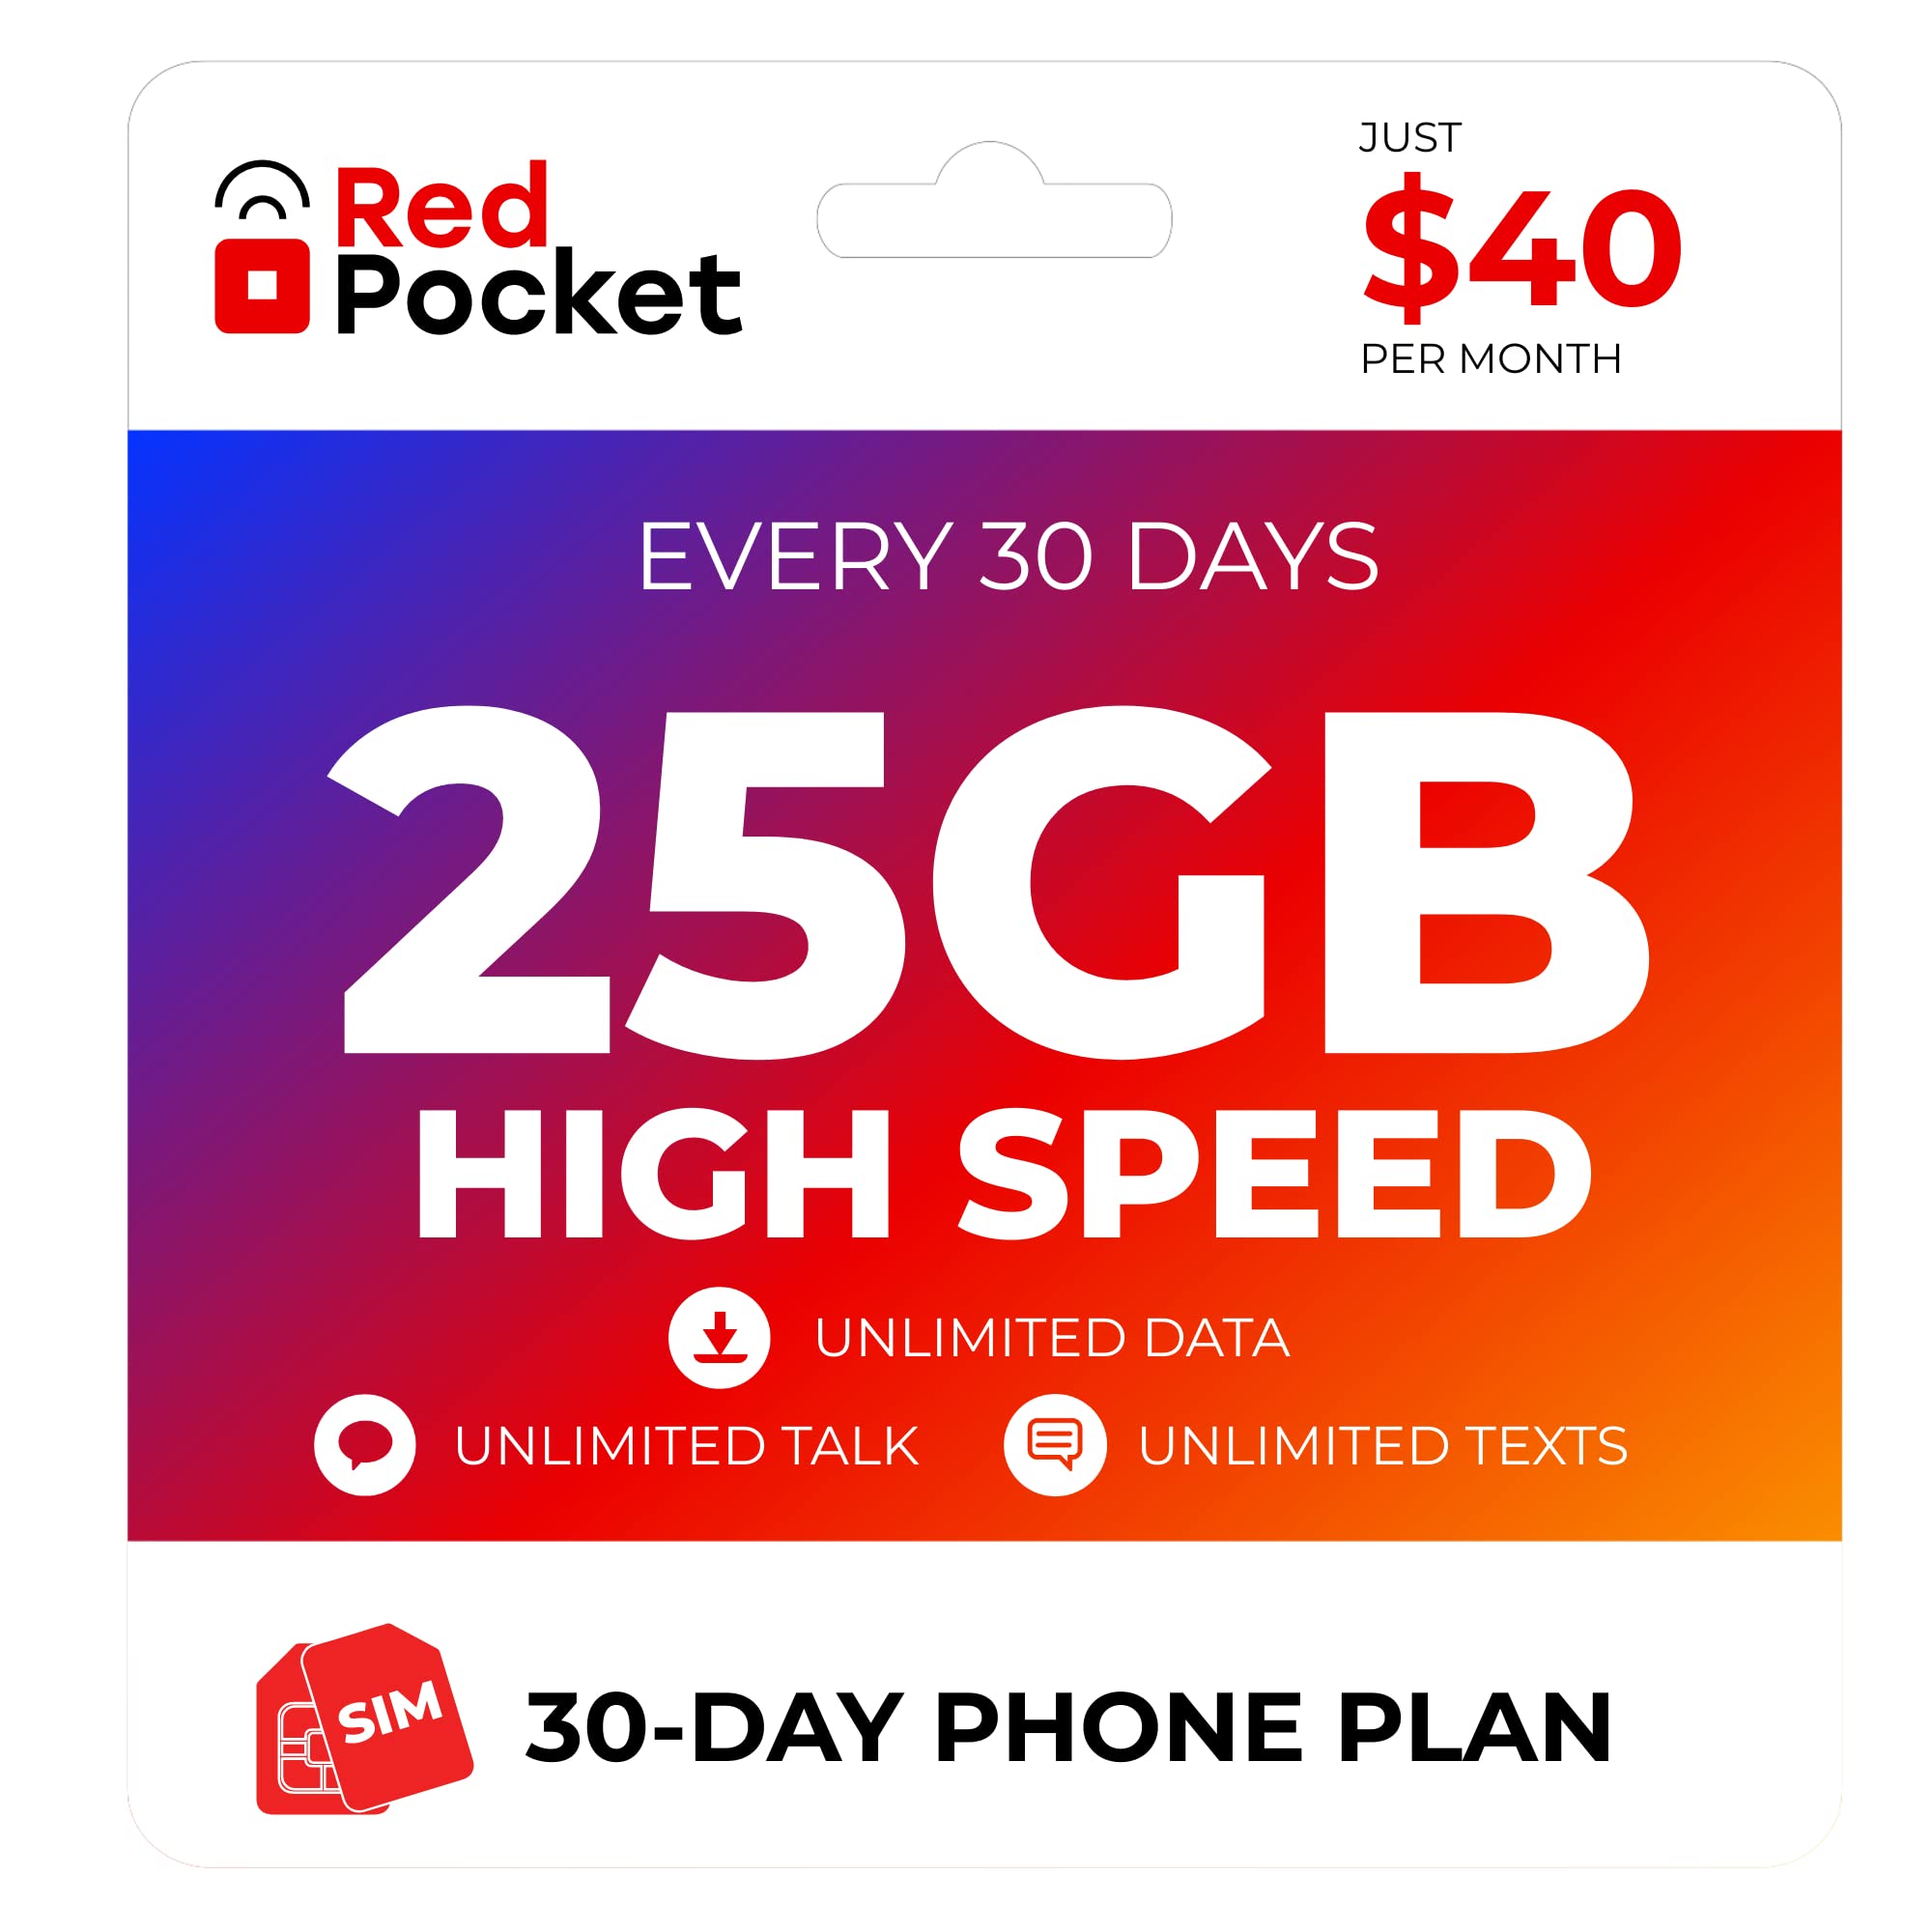 Red Pocket Mobile $40/Month Phone Plan, Free SIM Card for AT&T-Compatible Phone, Unlimited Data, Talk & Text, 25GB High-Speed 5G & 4G Data